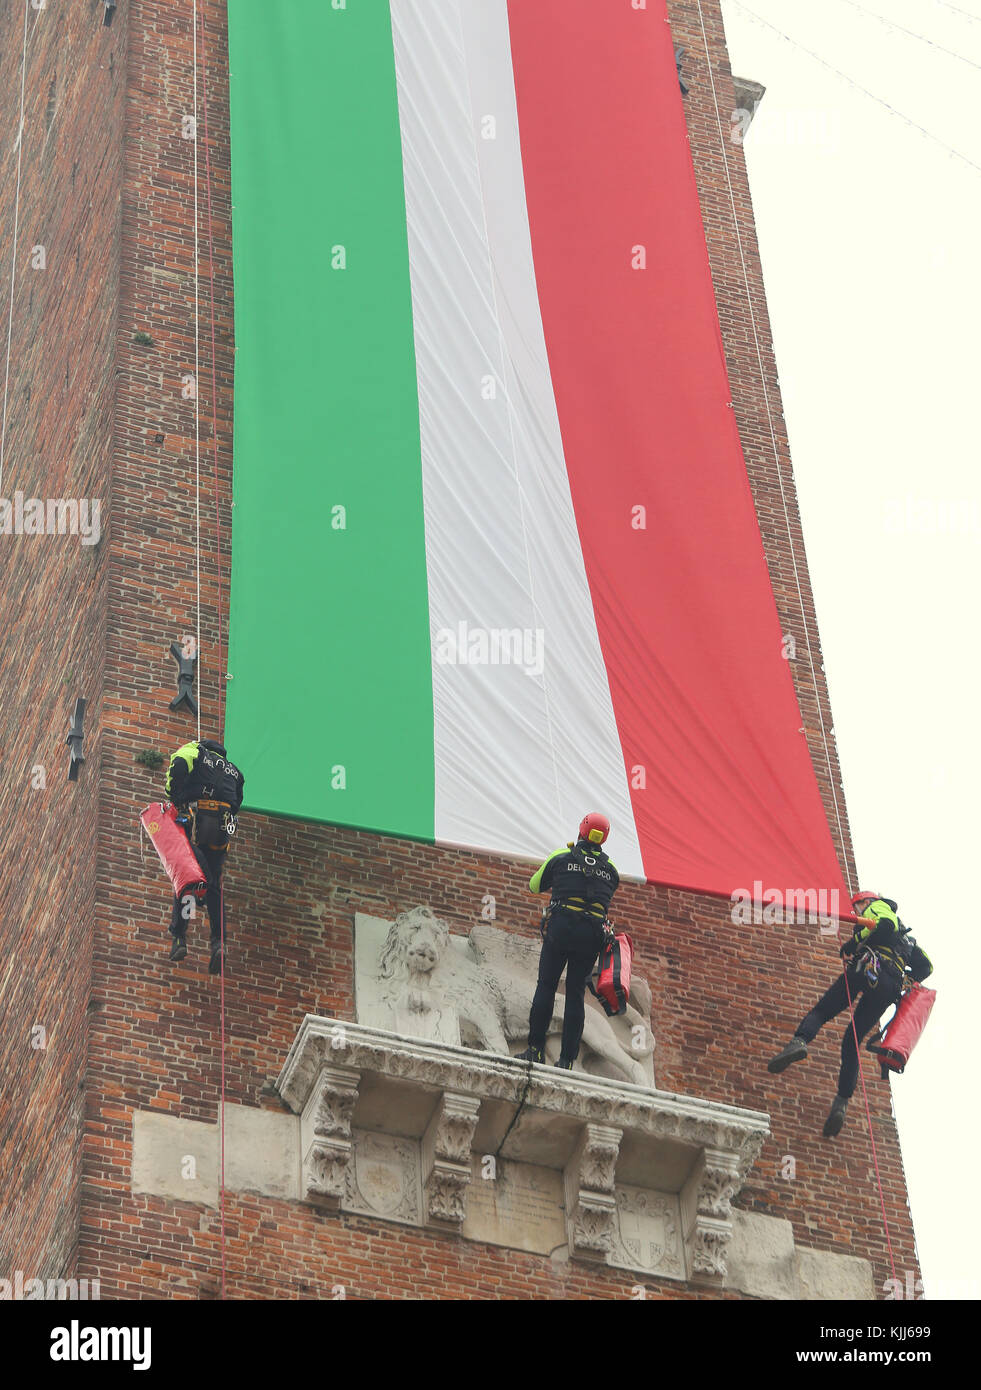 Vicenza, VI, Italy - December 4, 2015: Firefighters with a big italian flag on an ancient Palace called Basilica Palladiana during an exercise Stock Photo